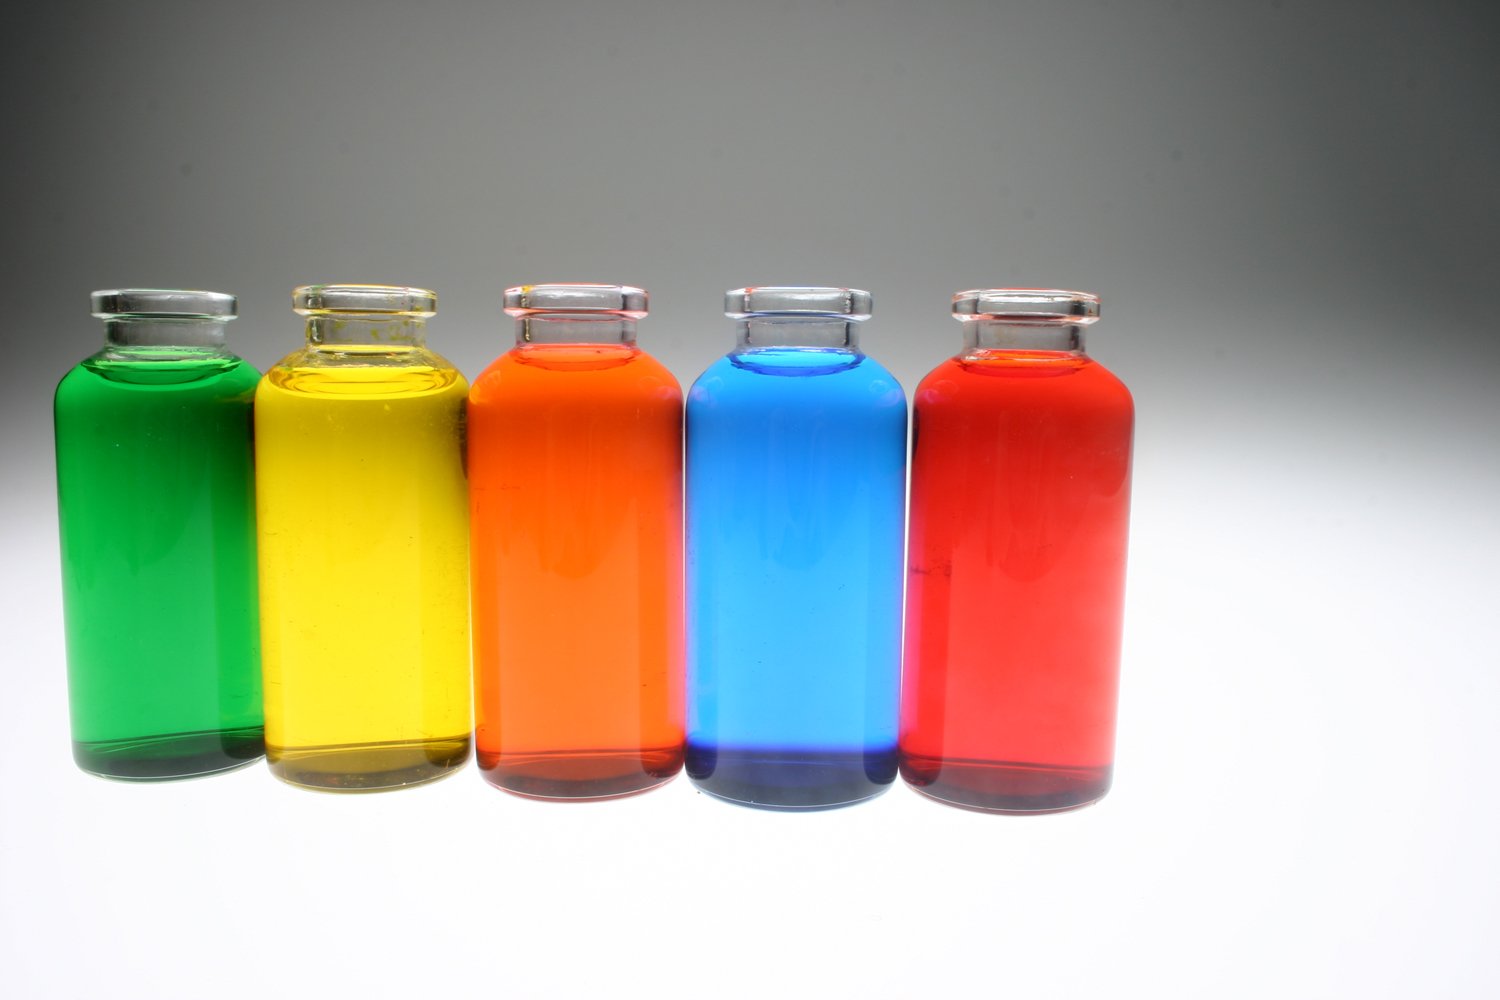 three small bottles in color sit next to each other